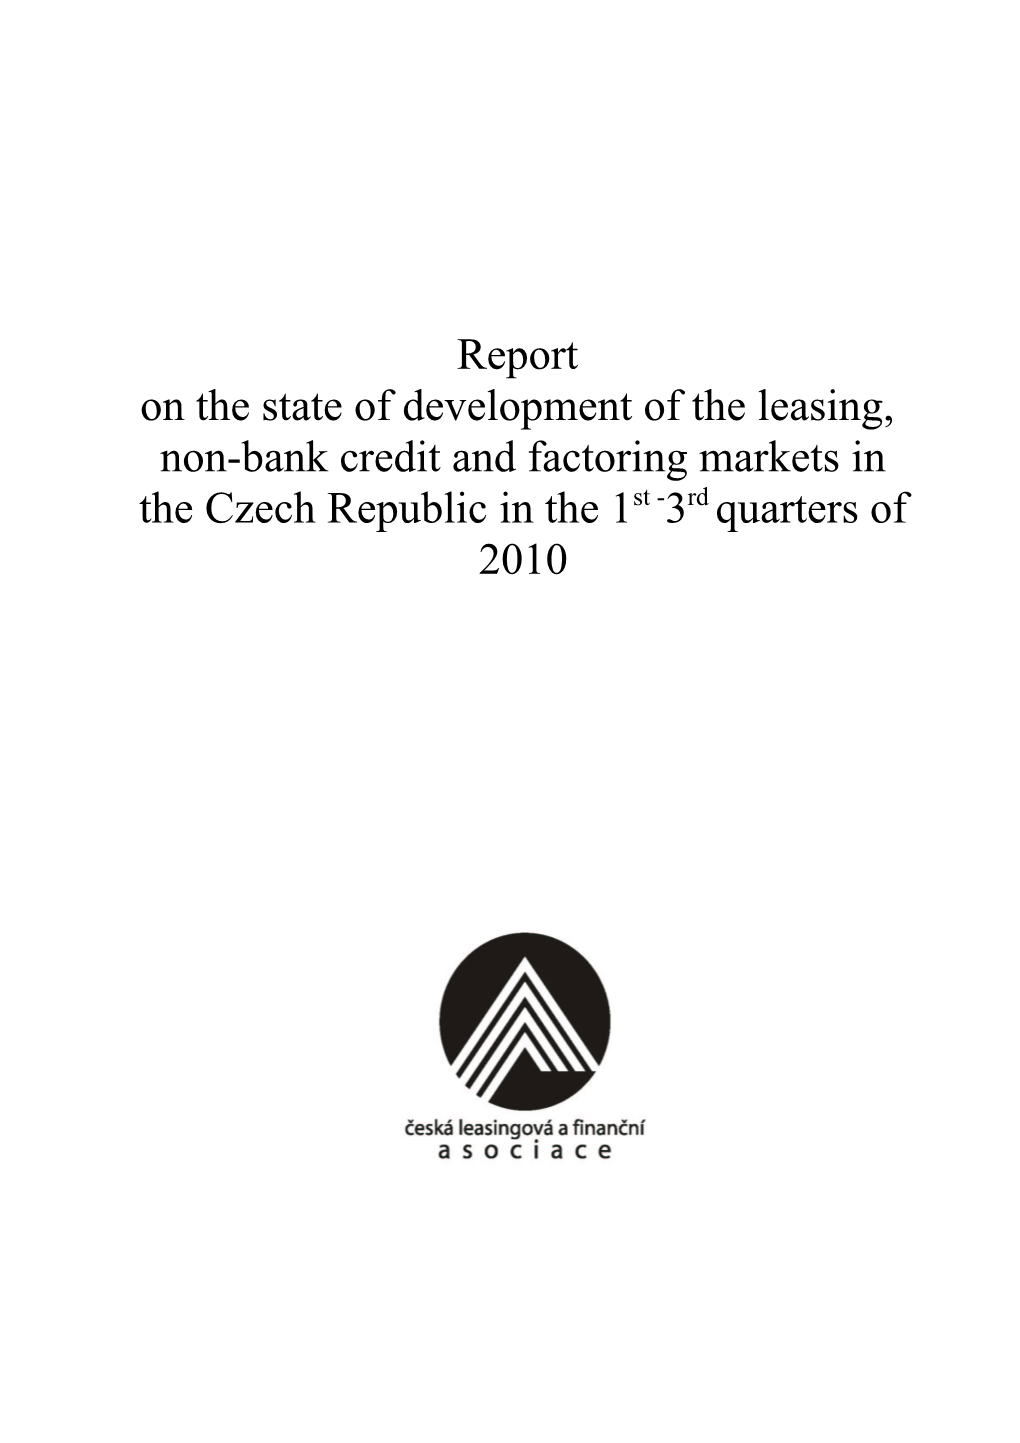 On the State of Development of the Leasing